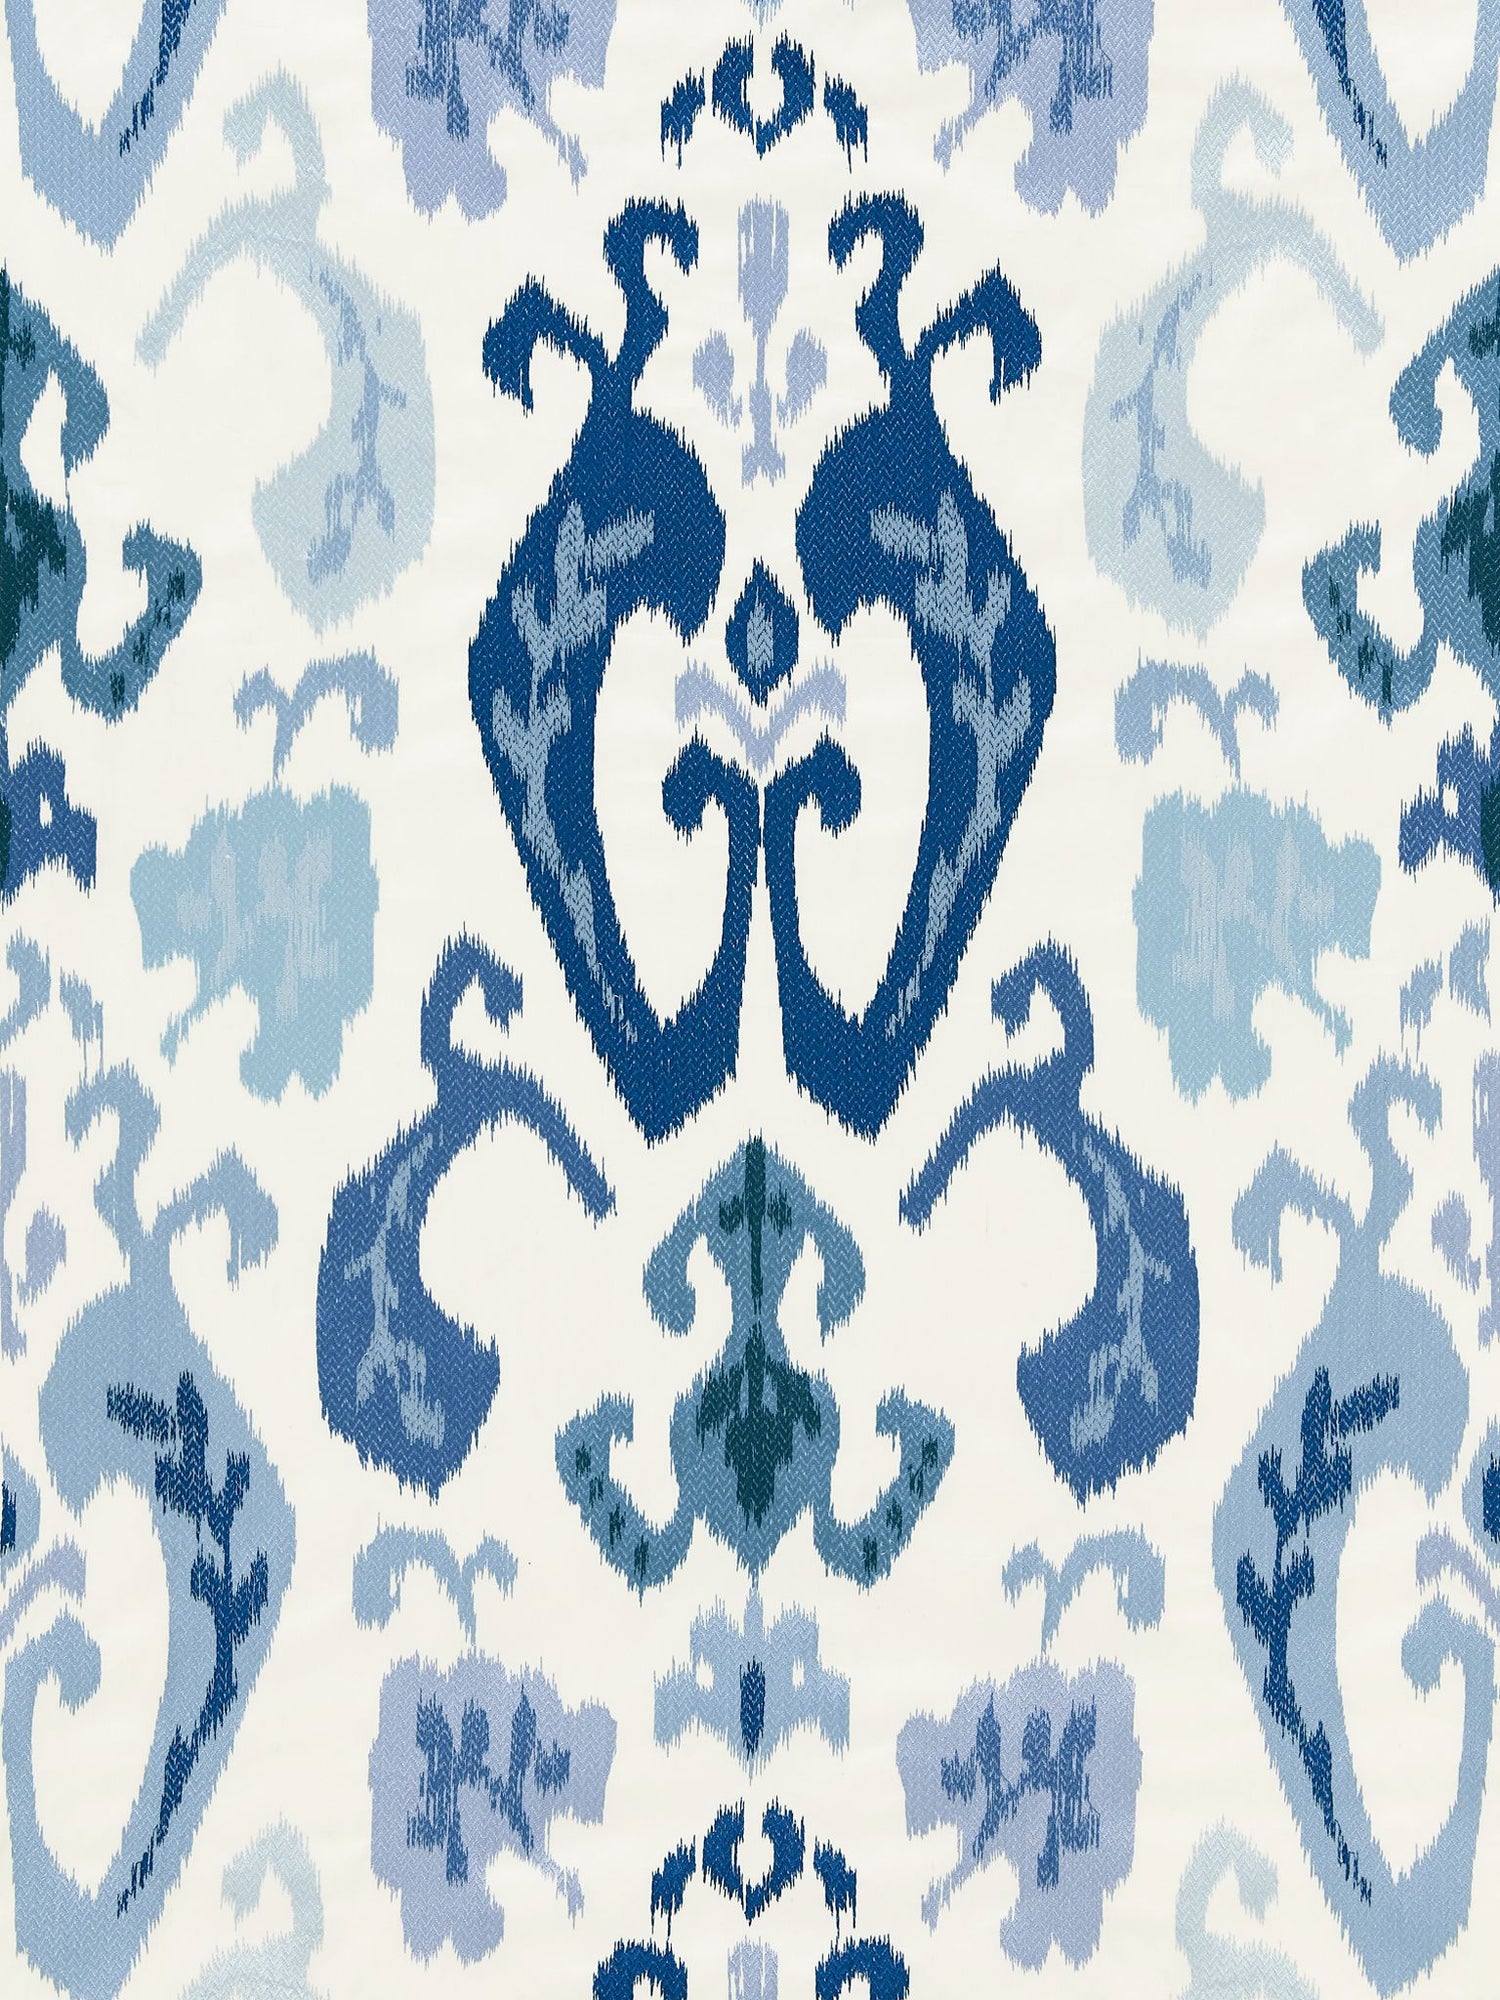 Mandalay Ikat Embroidery fabric in porcelain color - pattern number SC 000227172 - by Scalamandre in the Scalamandre Fabrics Book 1 collection